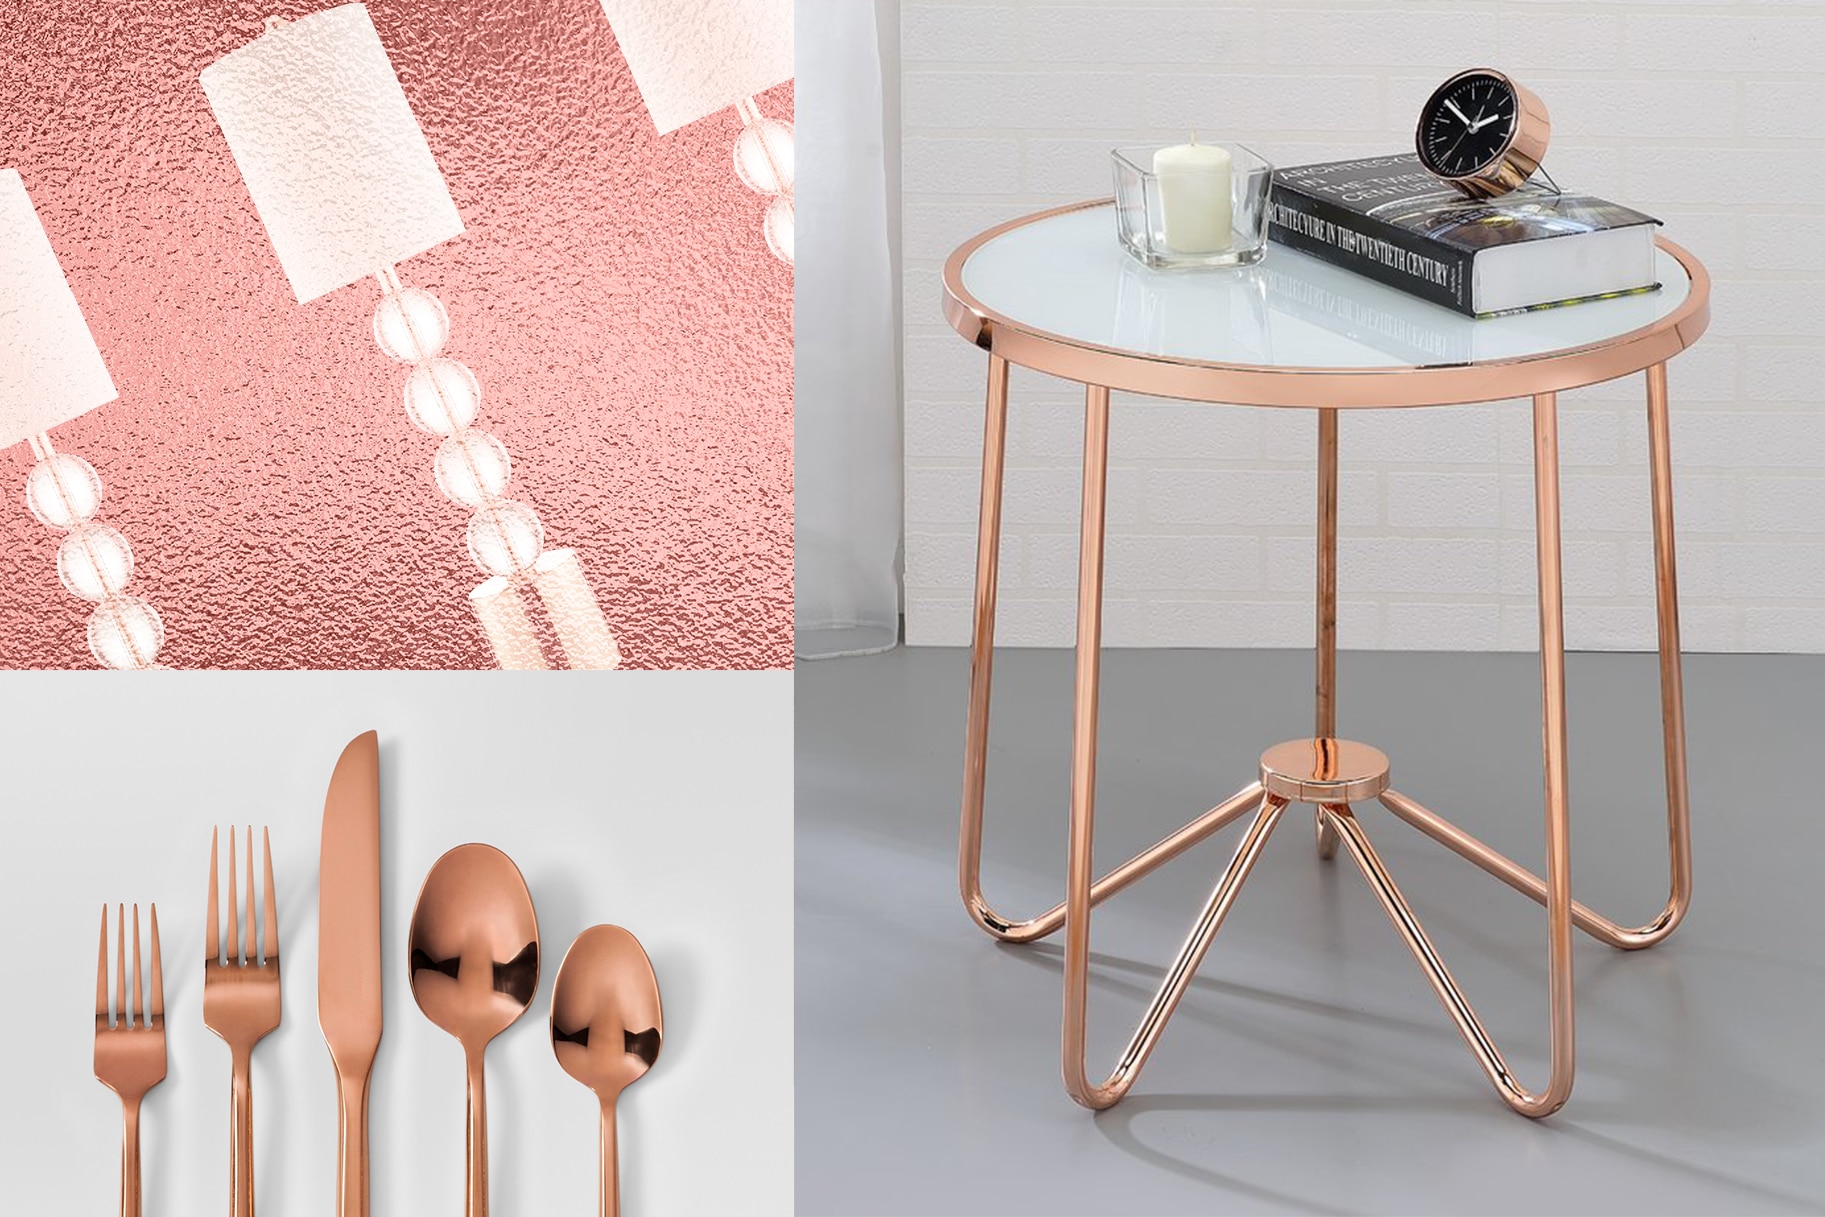 Rose Gold Home Decor: Accents, Furniture, Accessories, Housewares ...